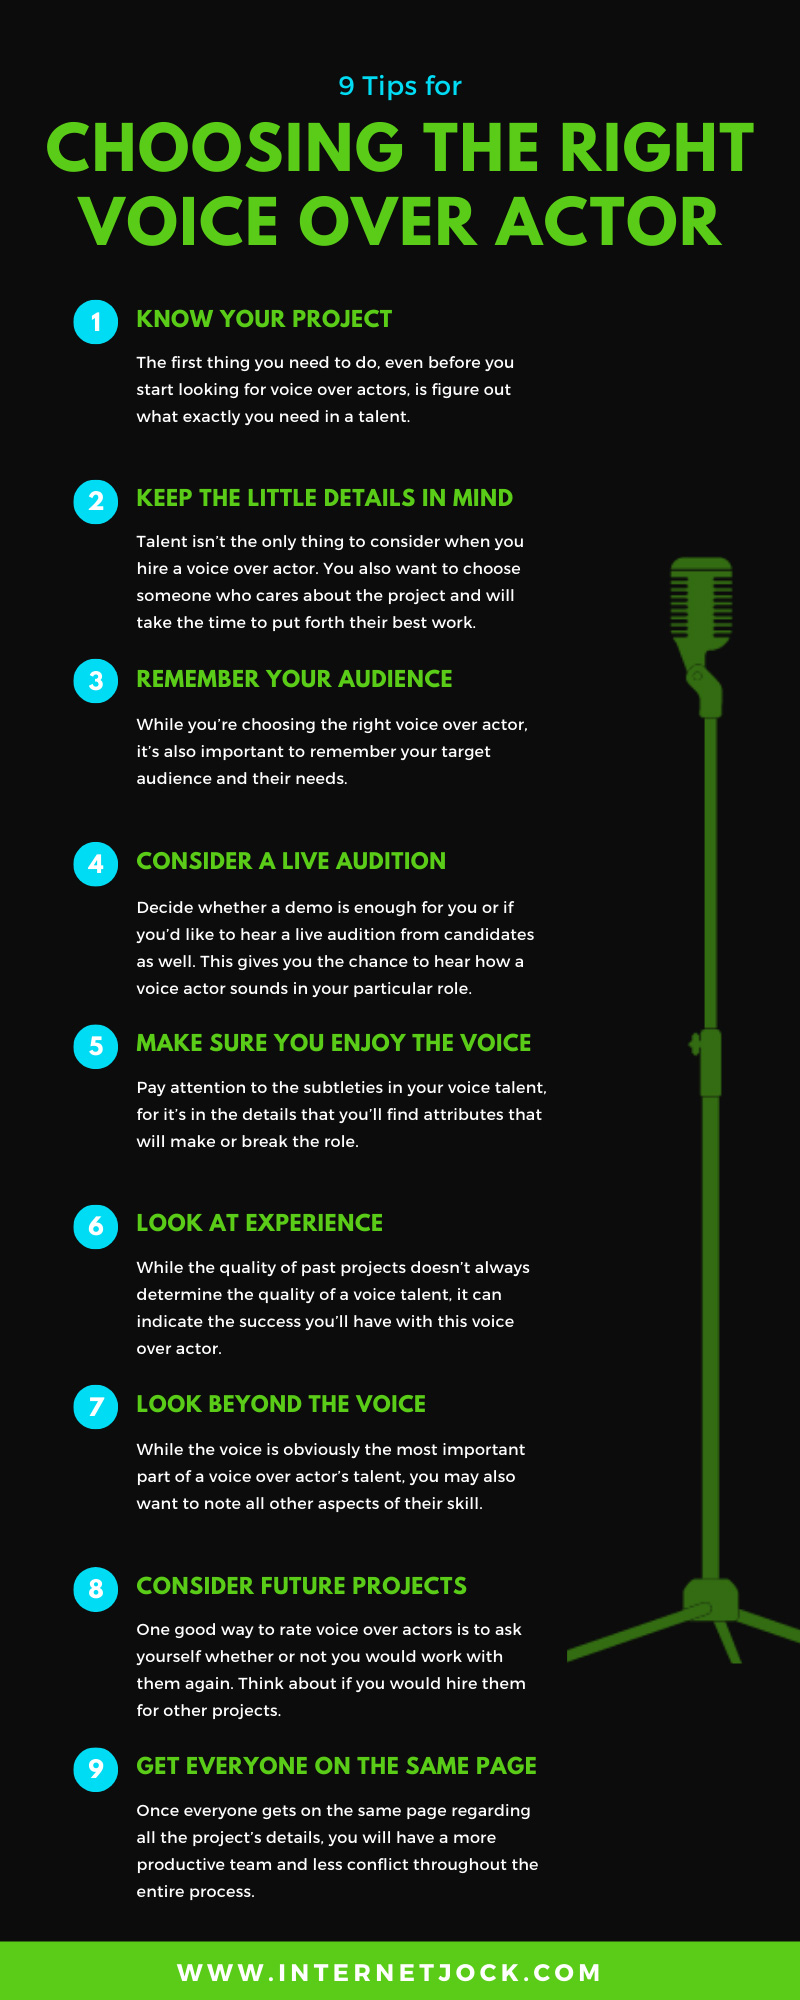 9 TIPS FOR CHOOSING THE RIGHT VOICE OVER ACTOR infographic